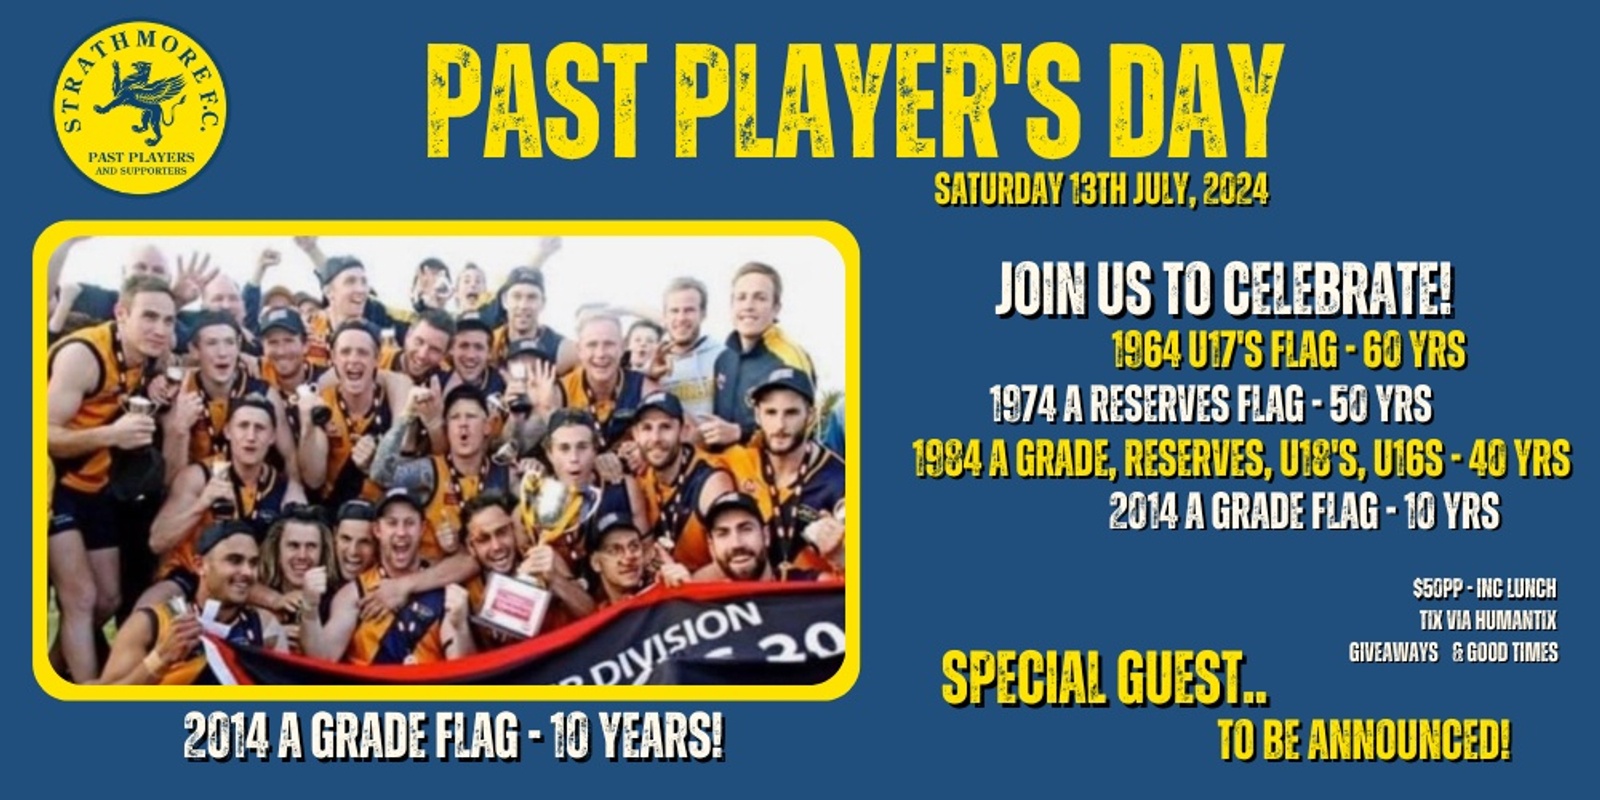 Banner image for Strathmore Past Players Day 2024